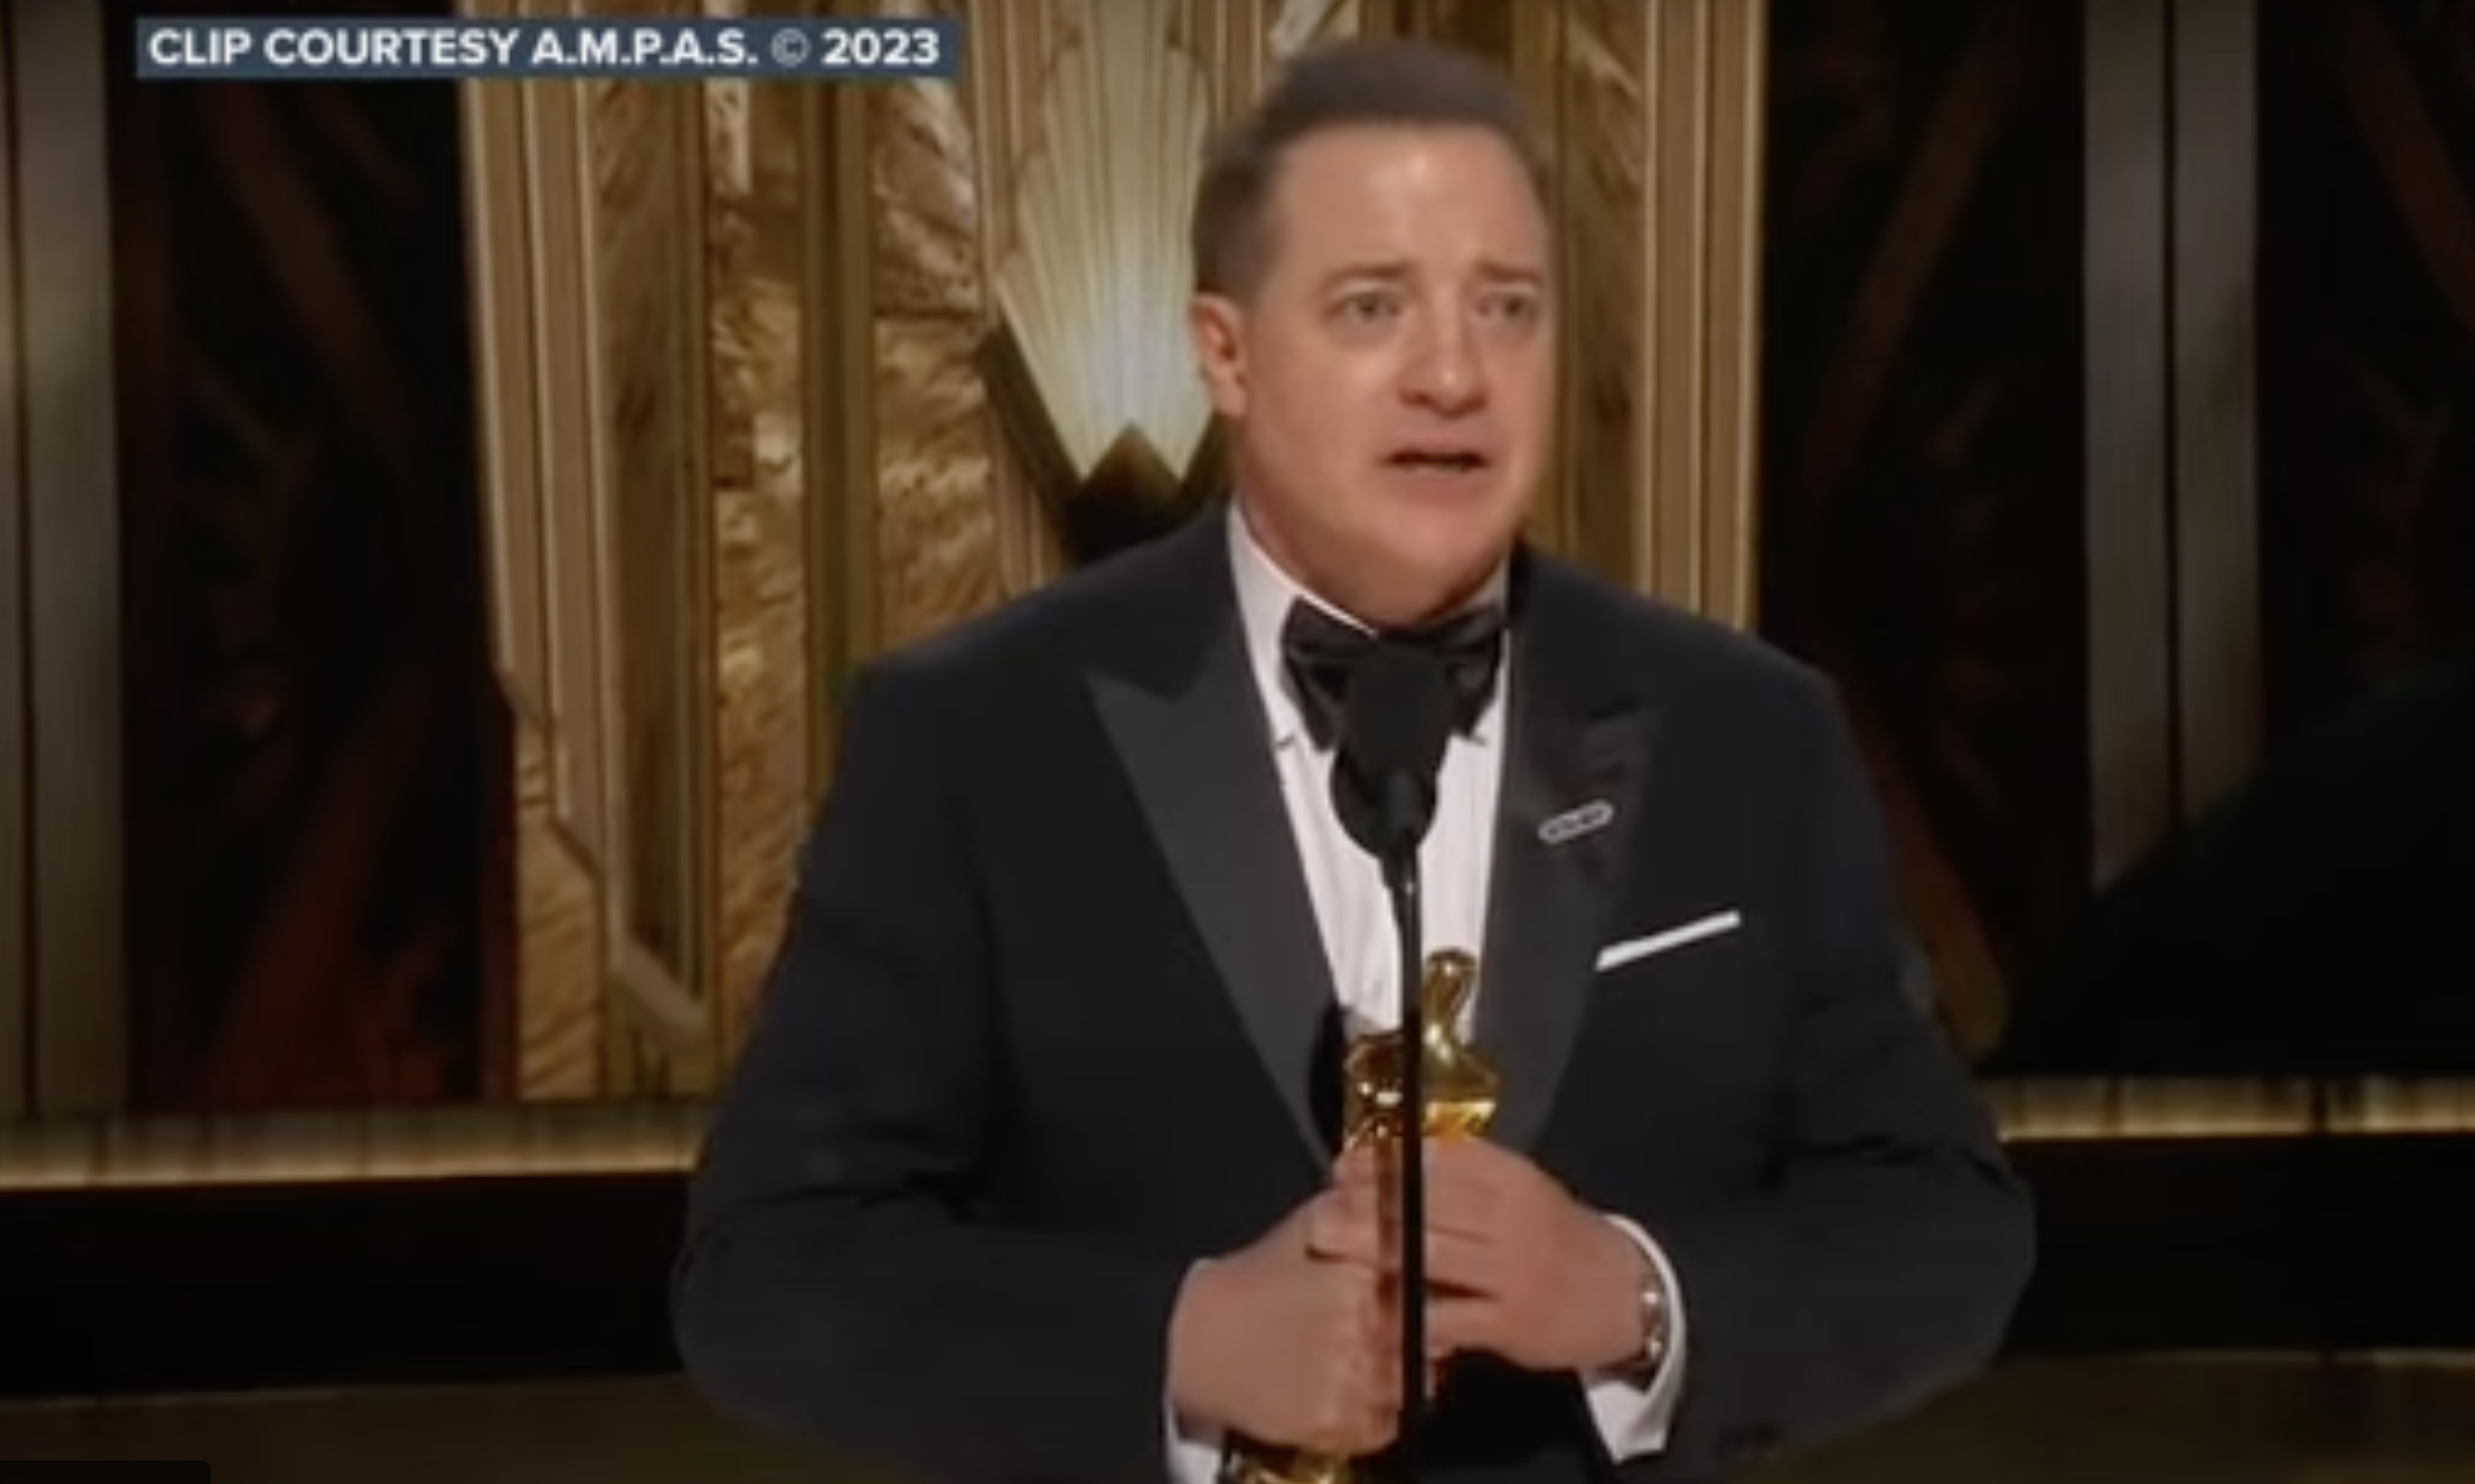 Brendan Fraser accepting his Best Acting Oscar for The Whale.